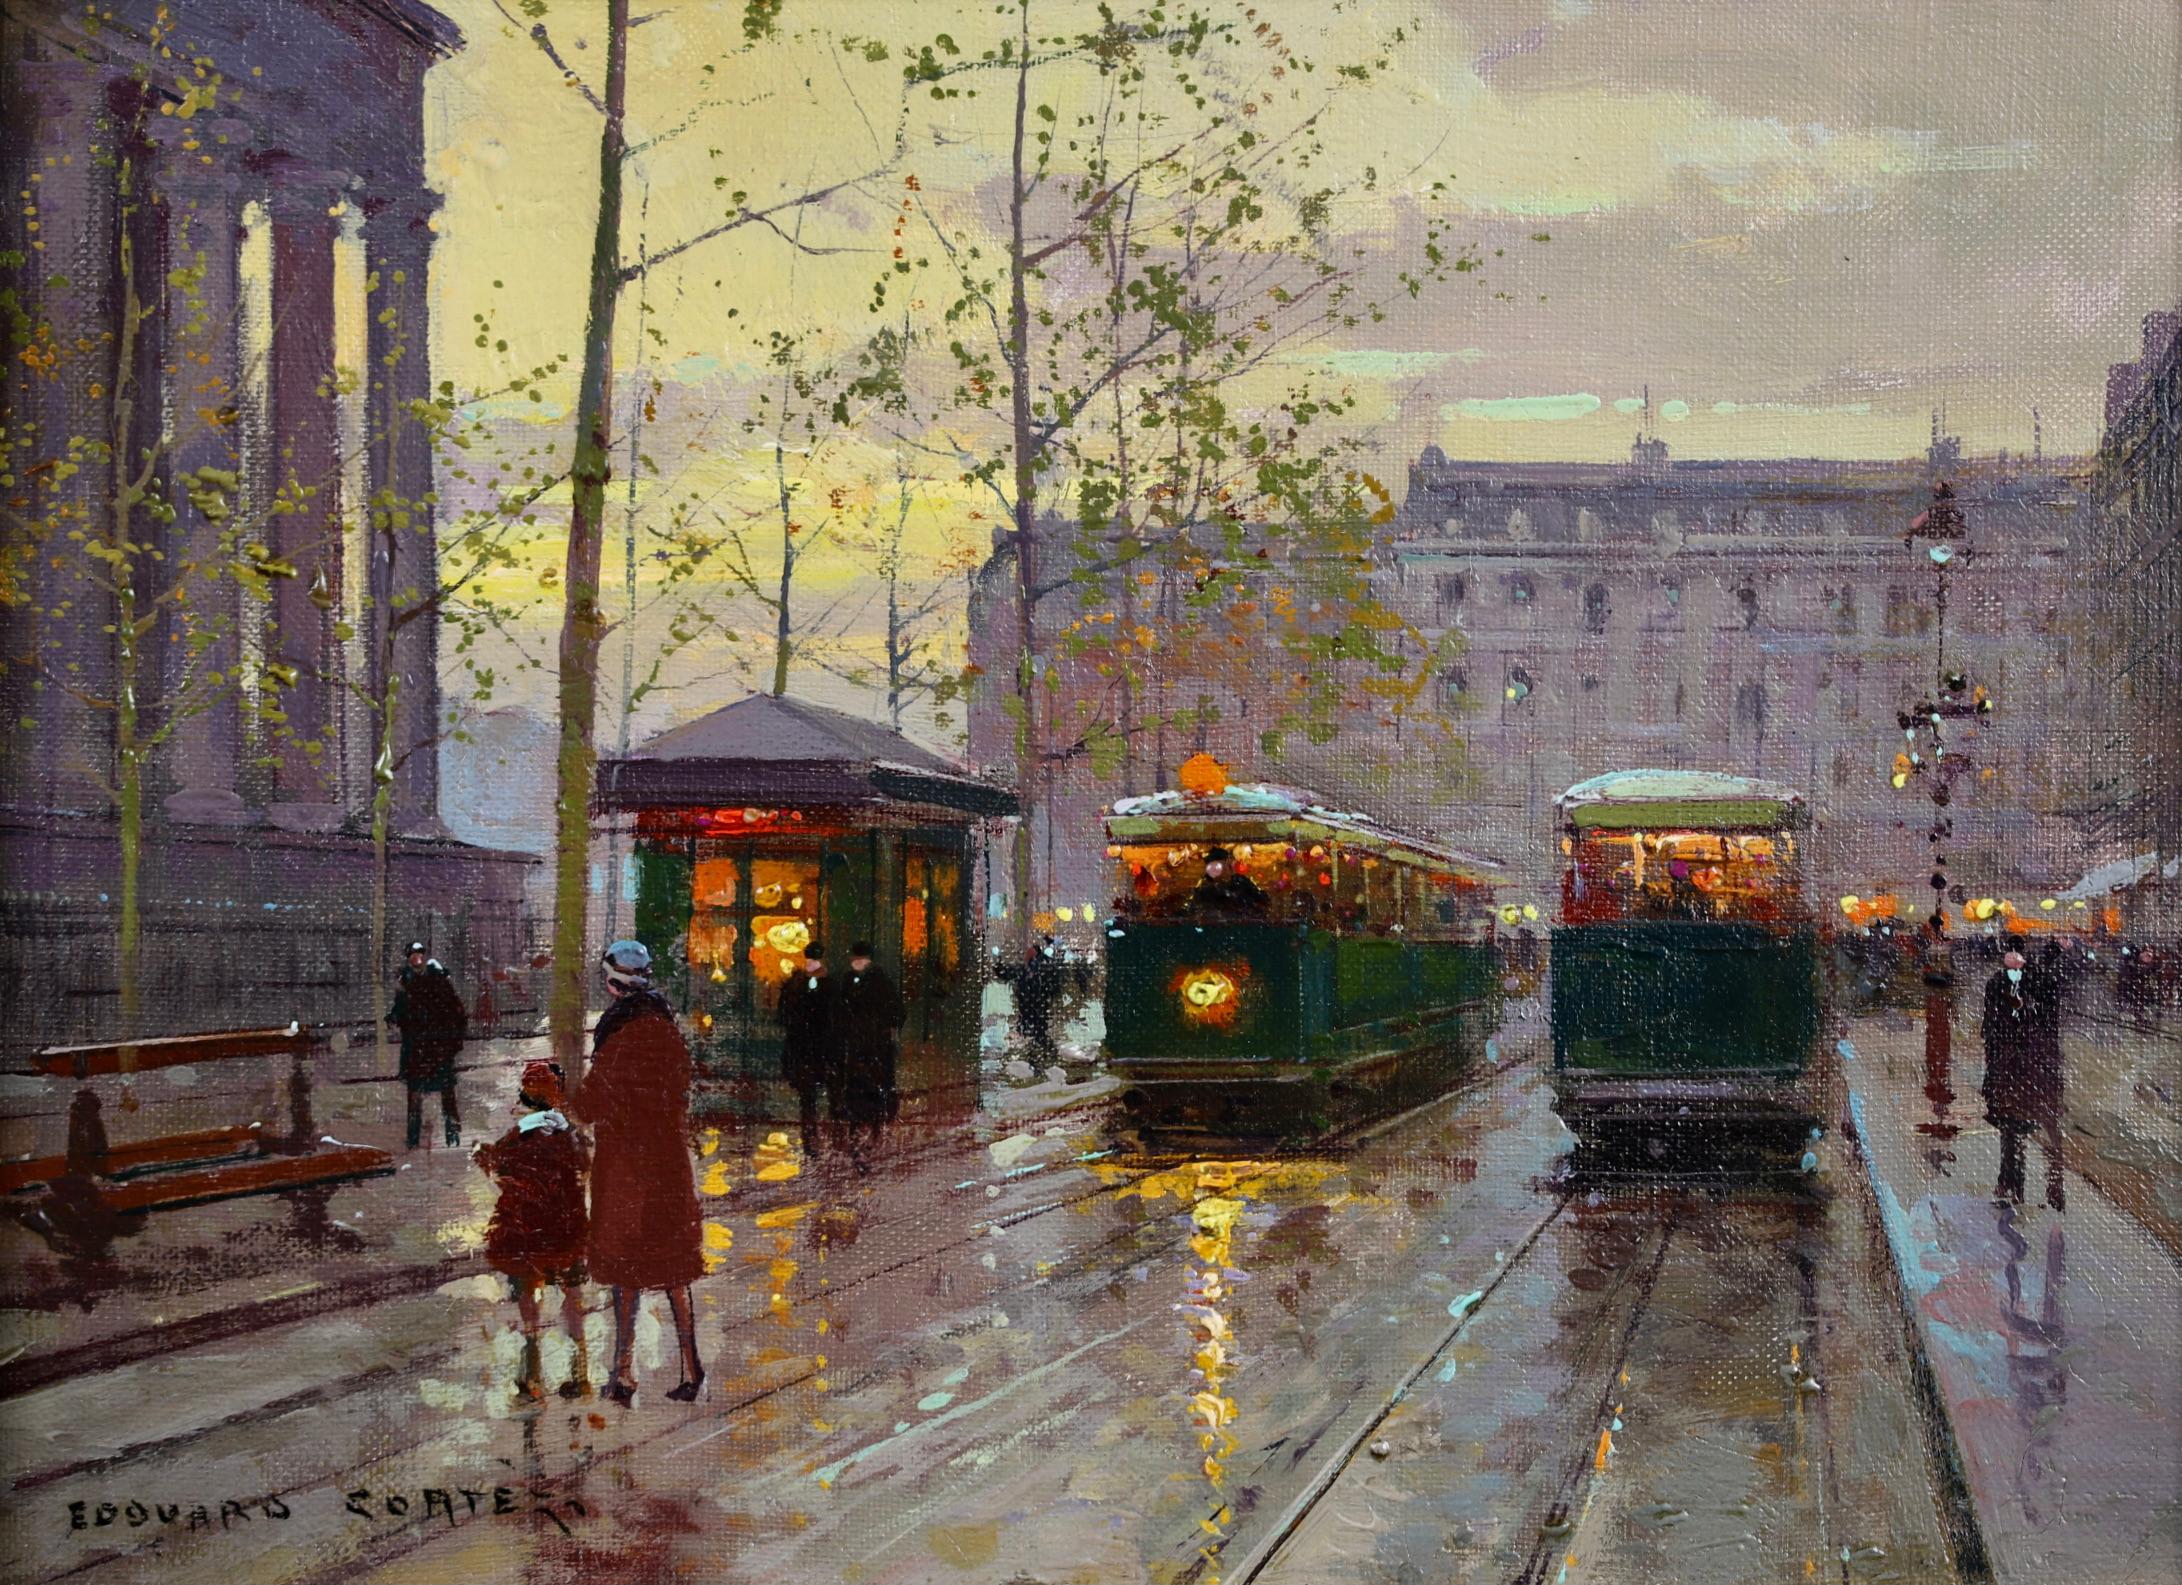 Signed oil on canvas figures in landscape circa 1930 by French impressionist painter Edouard Cortes. The work depicts a view of Paris, France on a winter's day. The light of the trams are reflecting in the wet ground.

Signature:
Signed lower